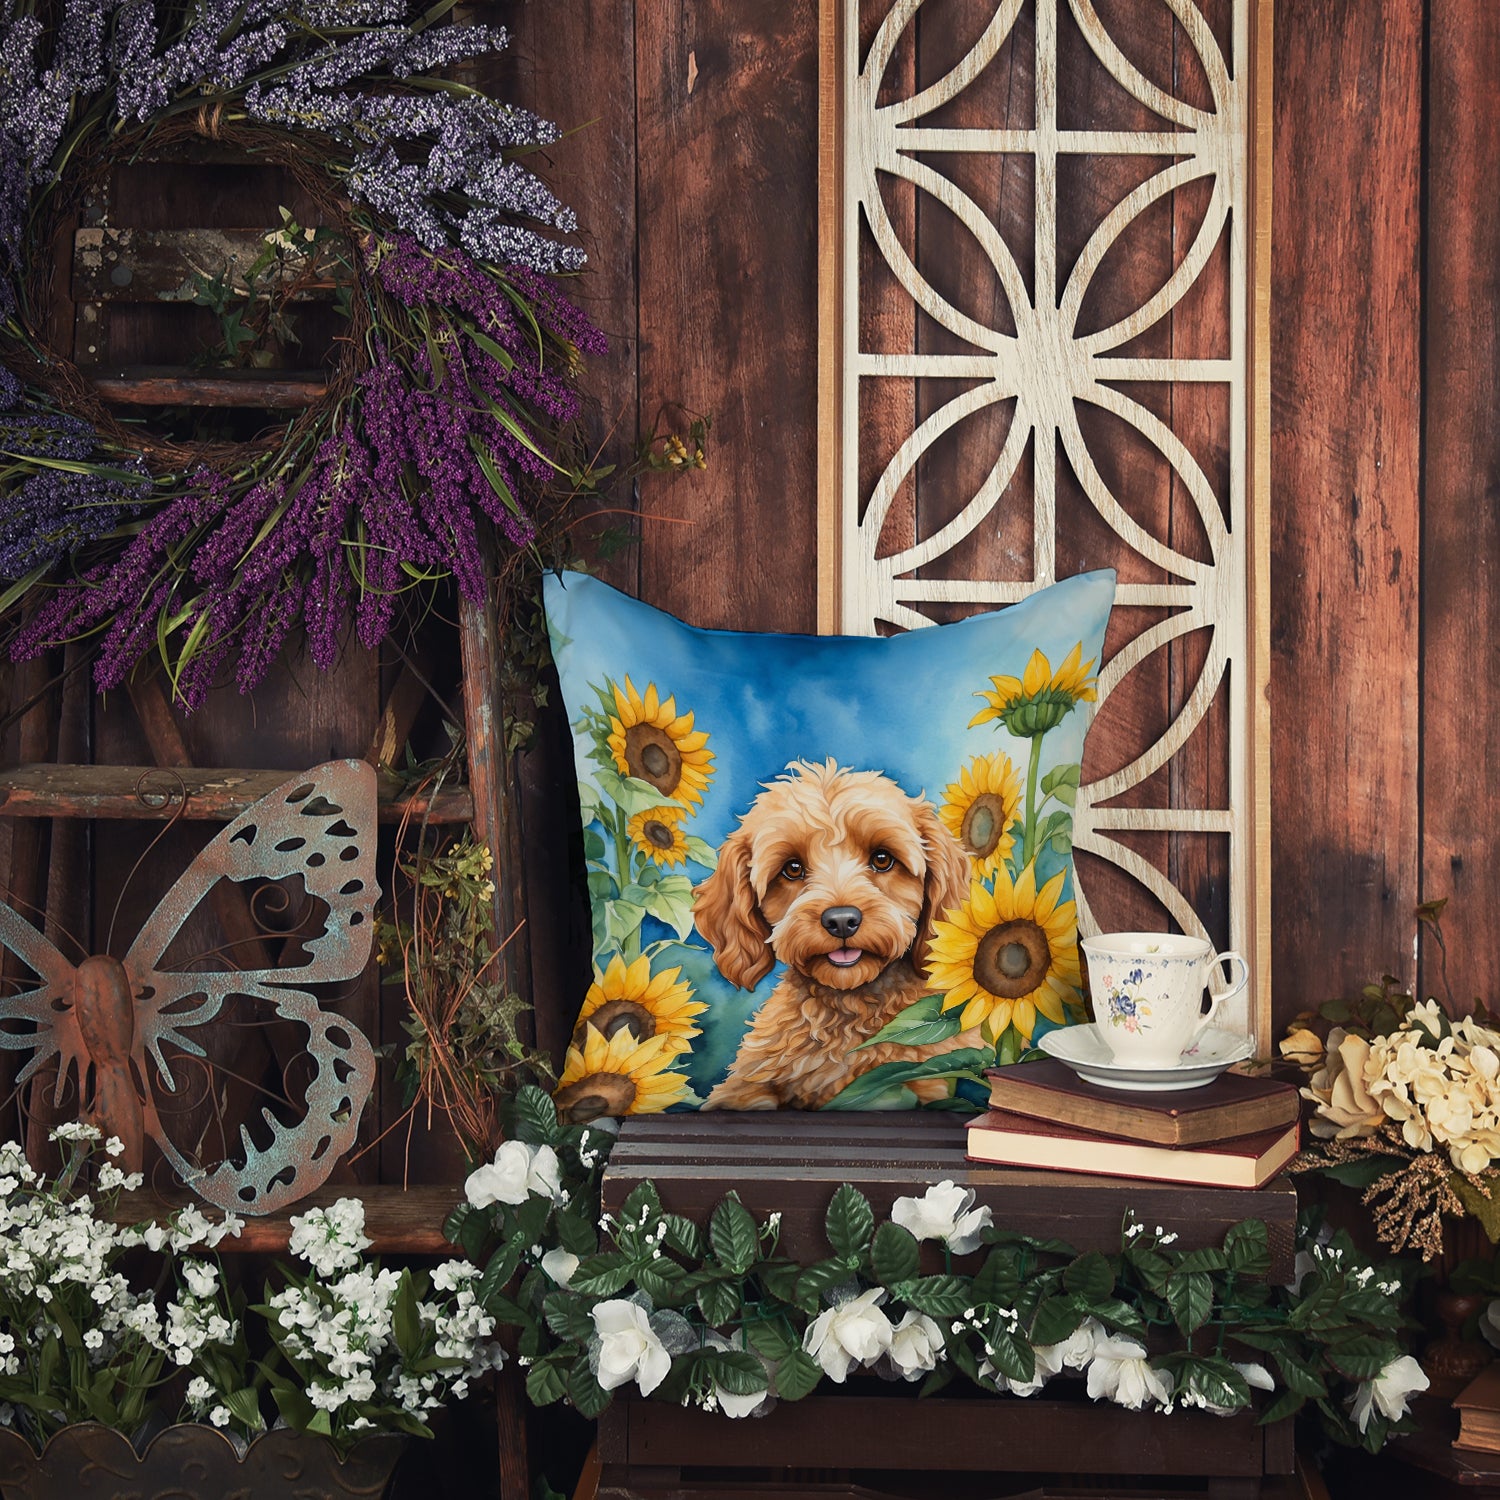 Cockapoo in Sunflowers Throw Pillow